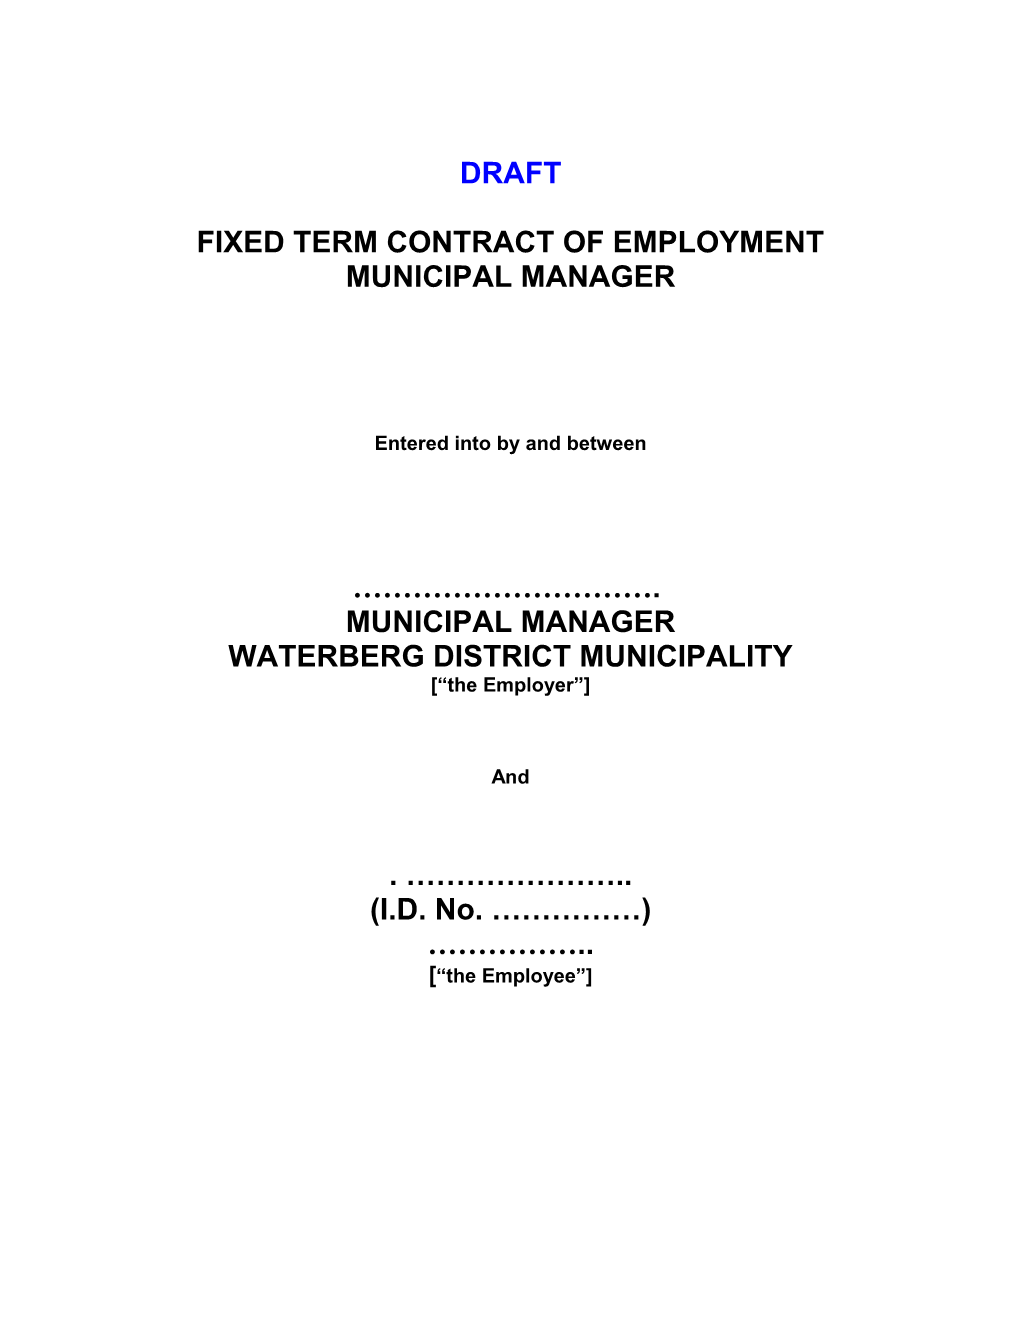 Fixed Term Contract of Employment